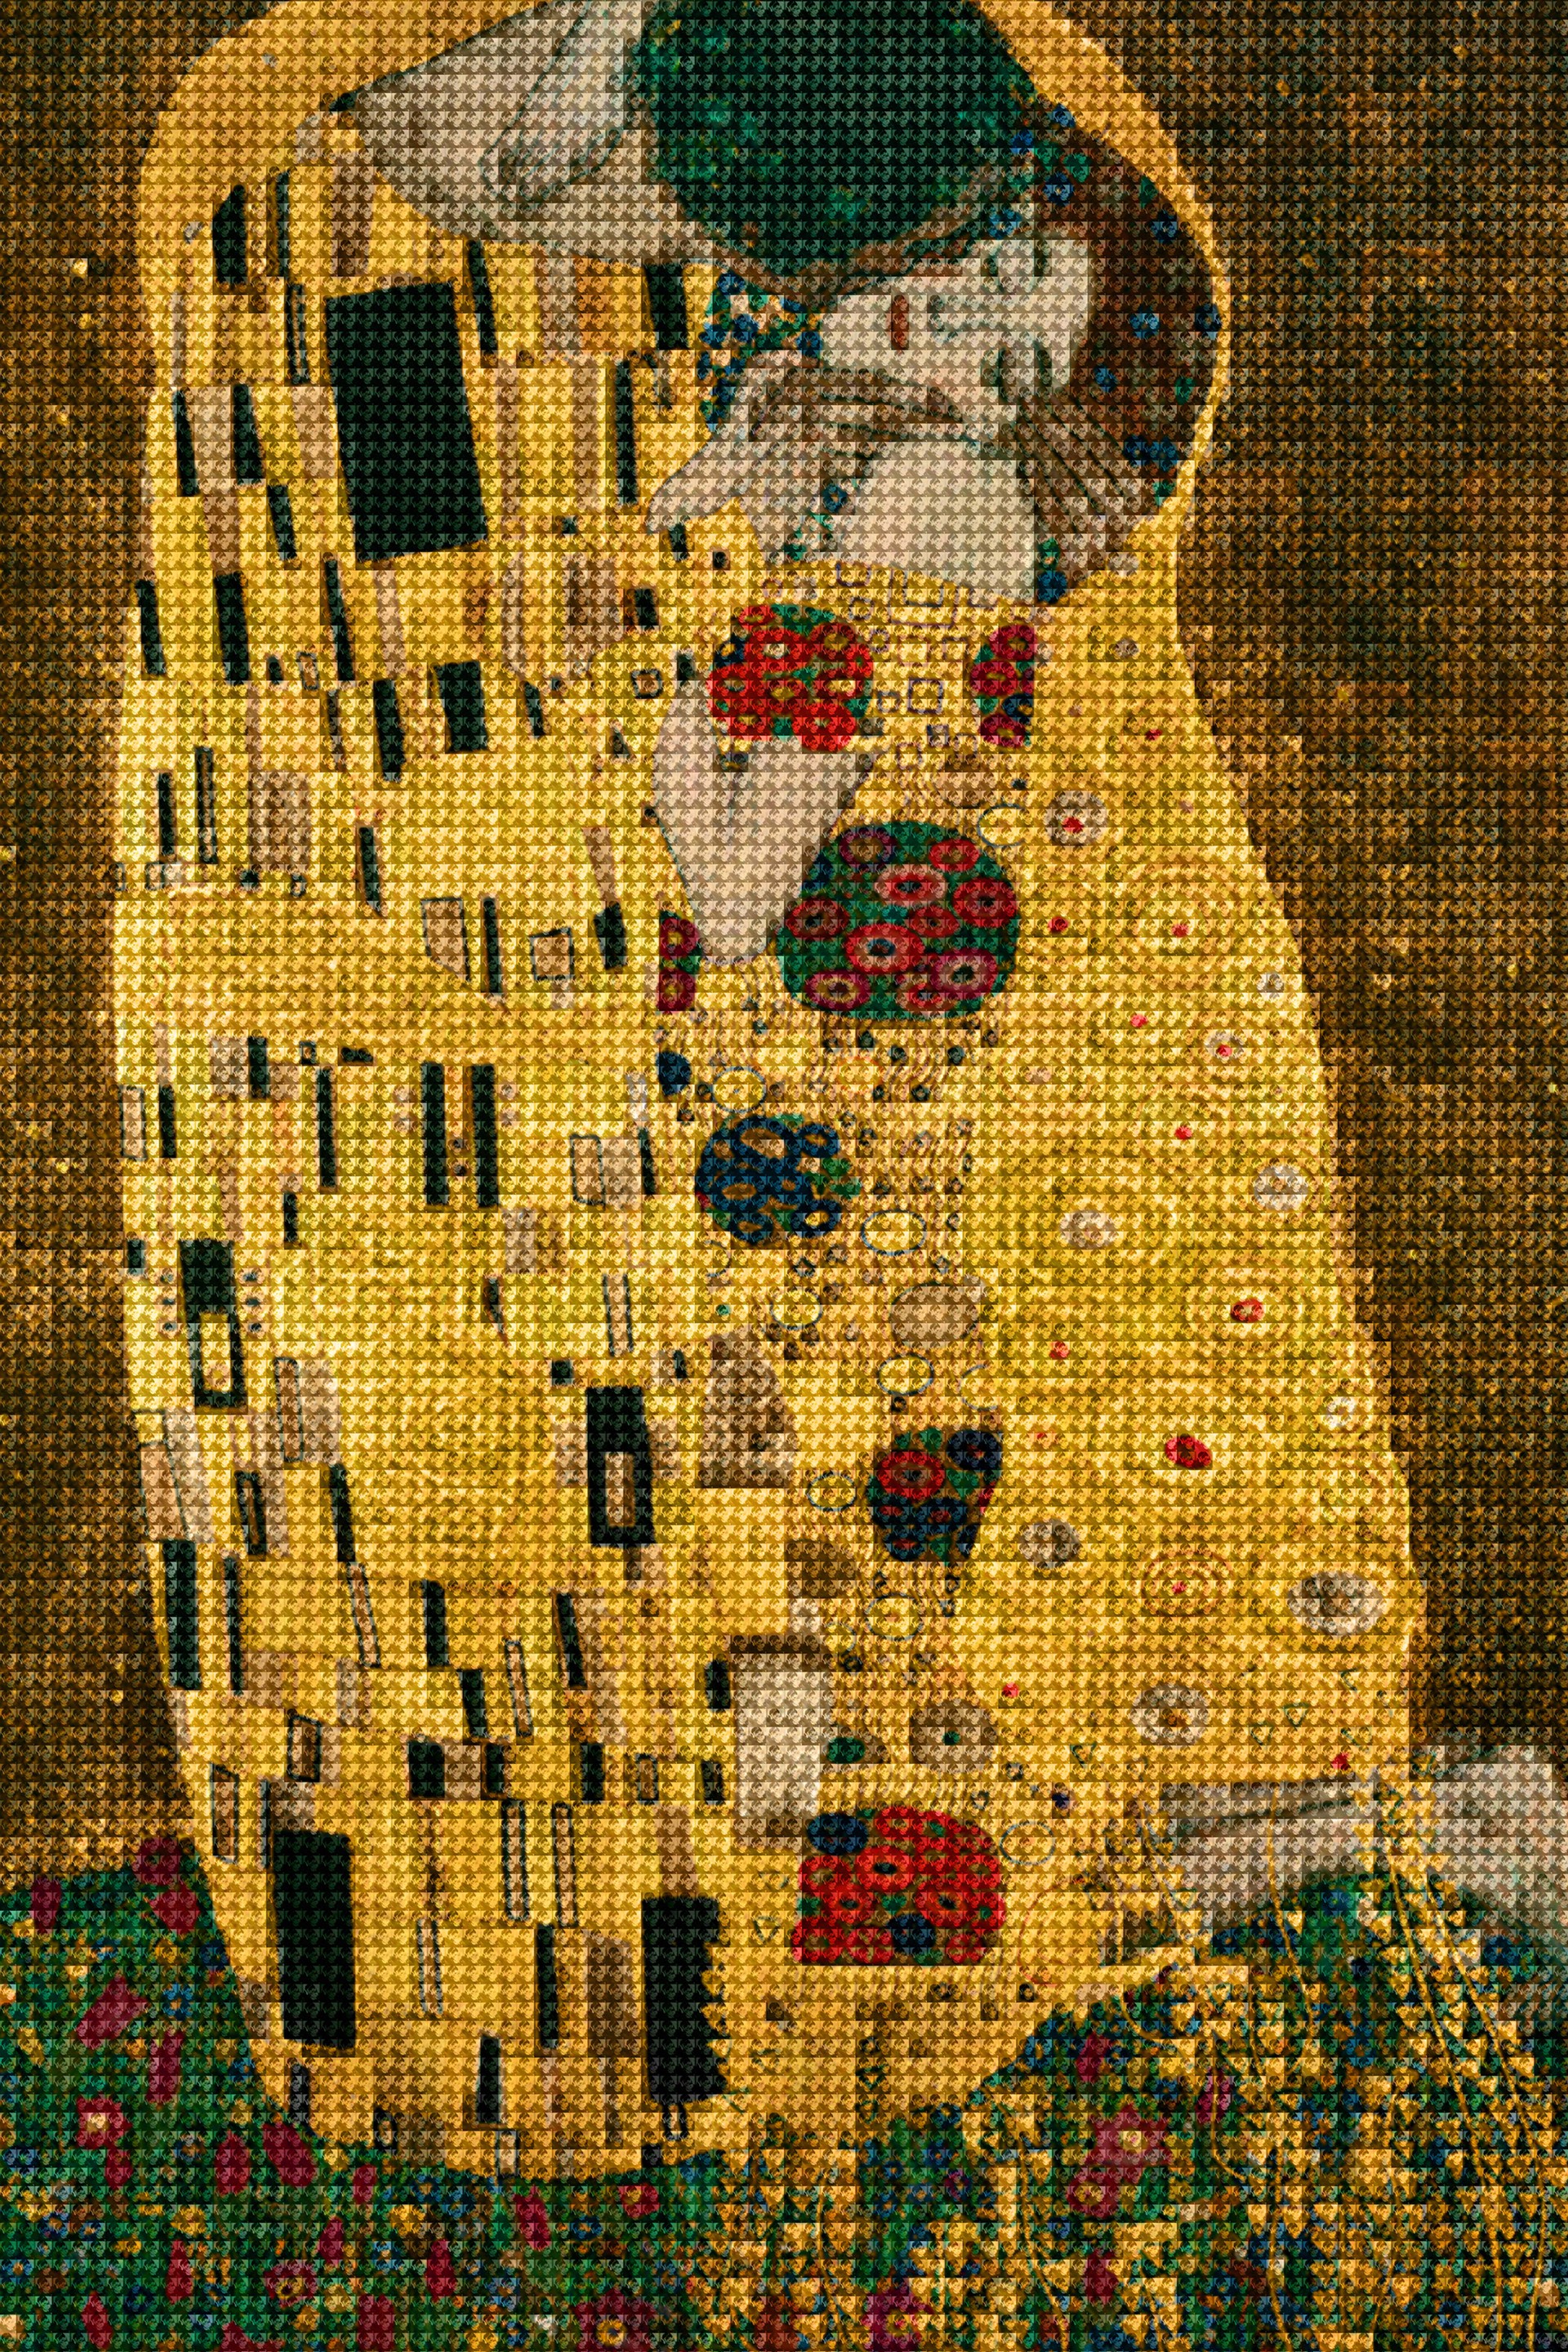 Kiss You in Vienna, After Klimt by Alex Guofeng Cao